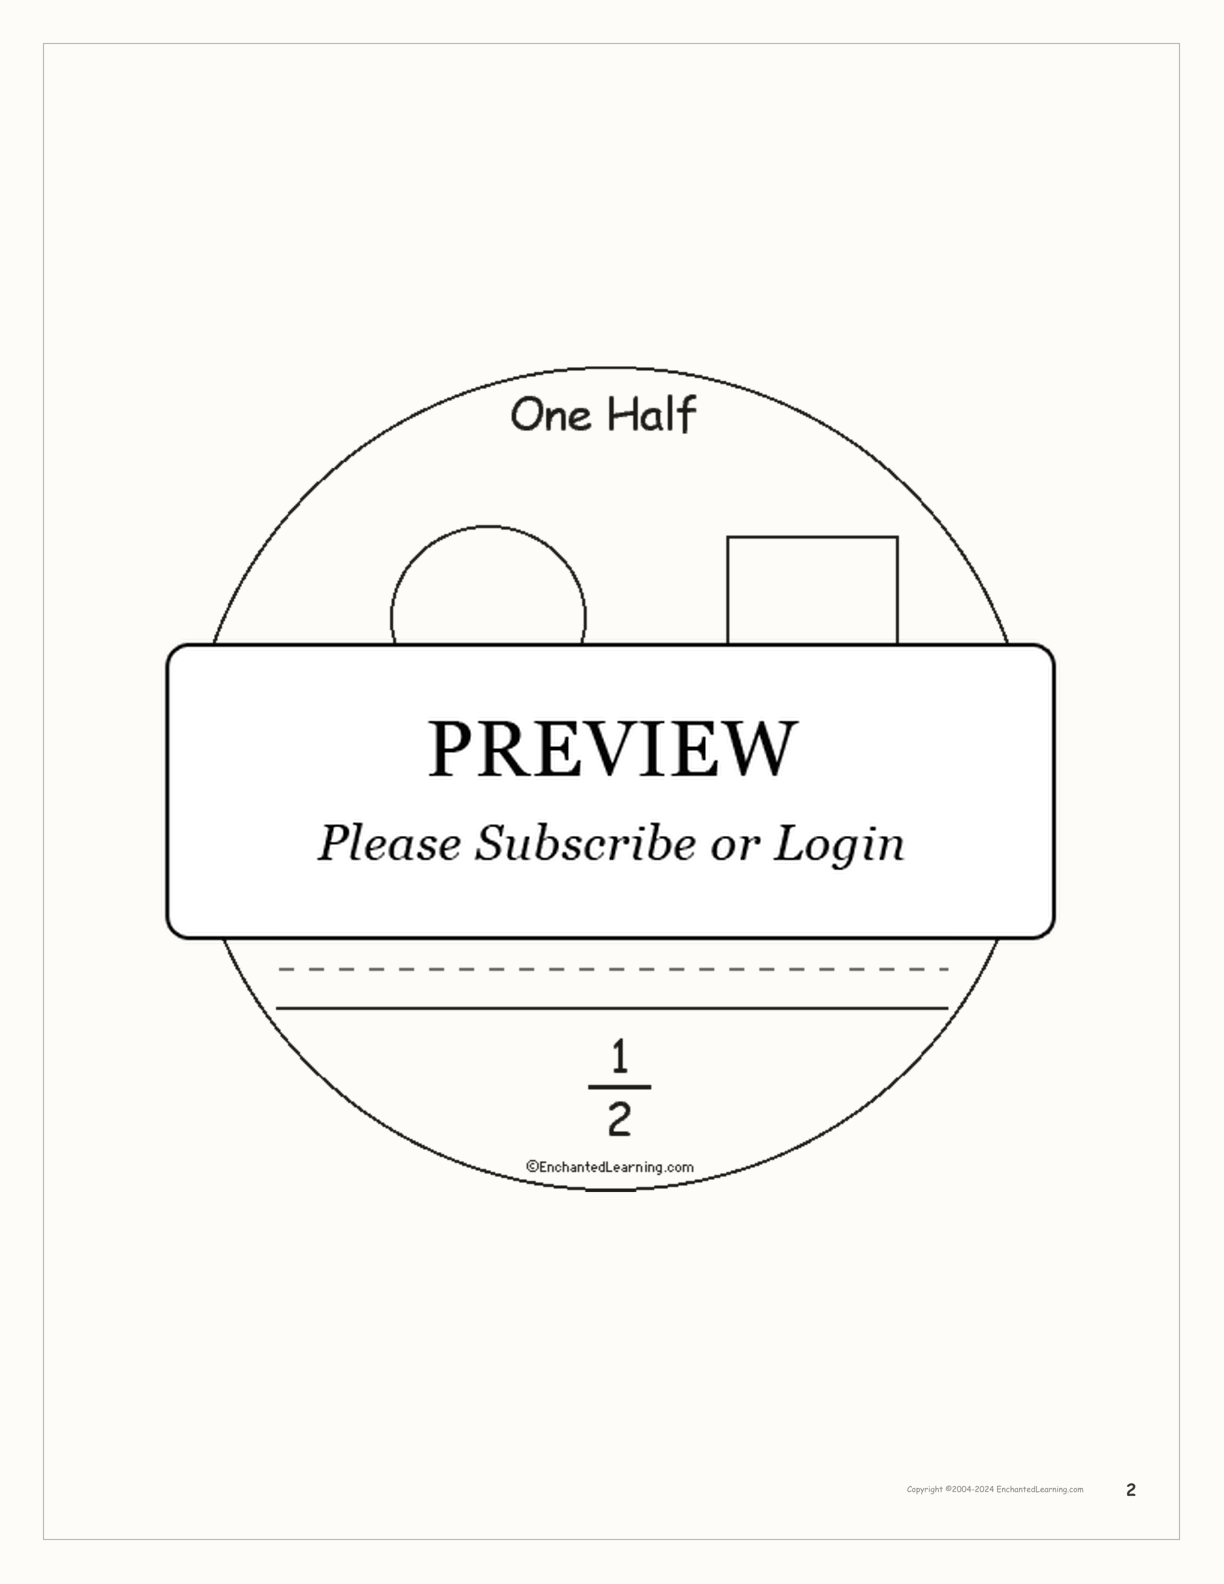 One Half: A Book on Fractions interactive printout page 2